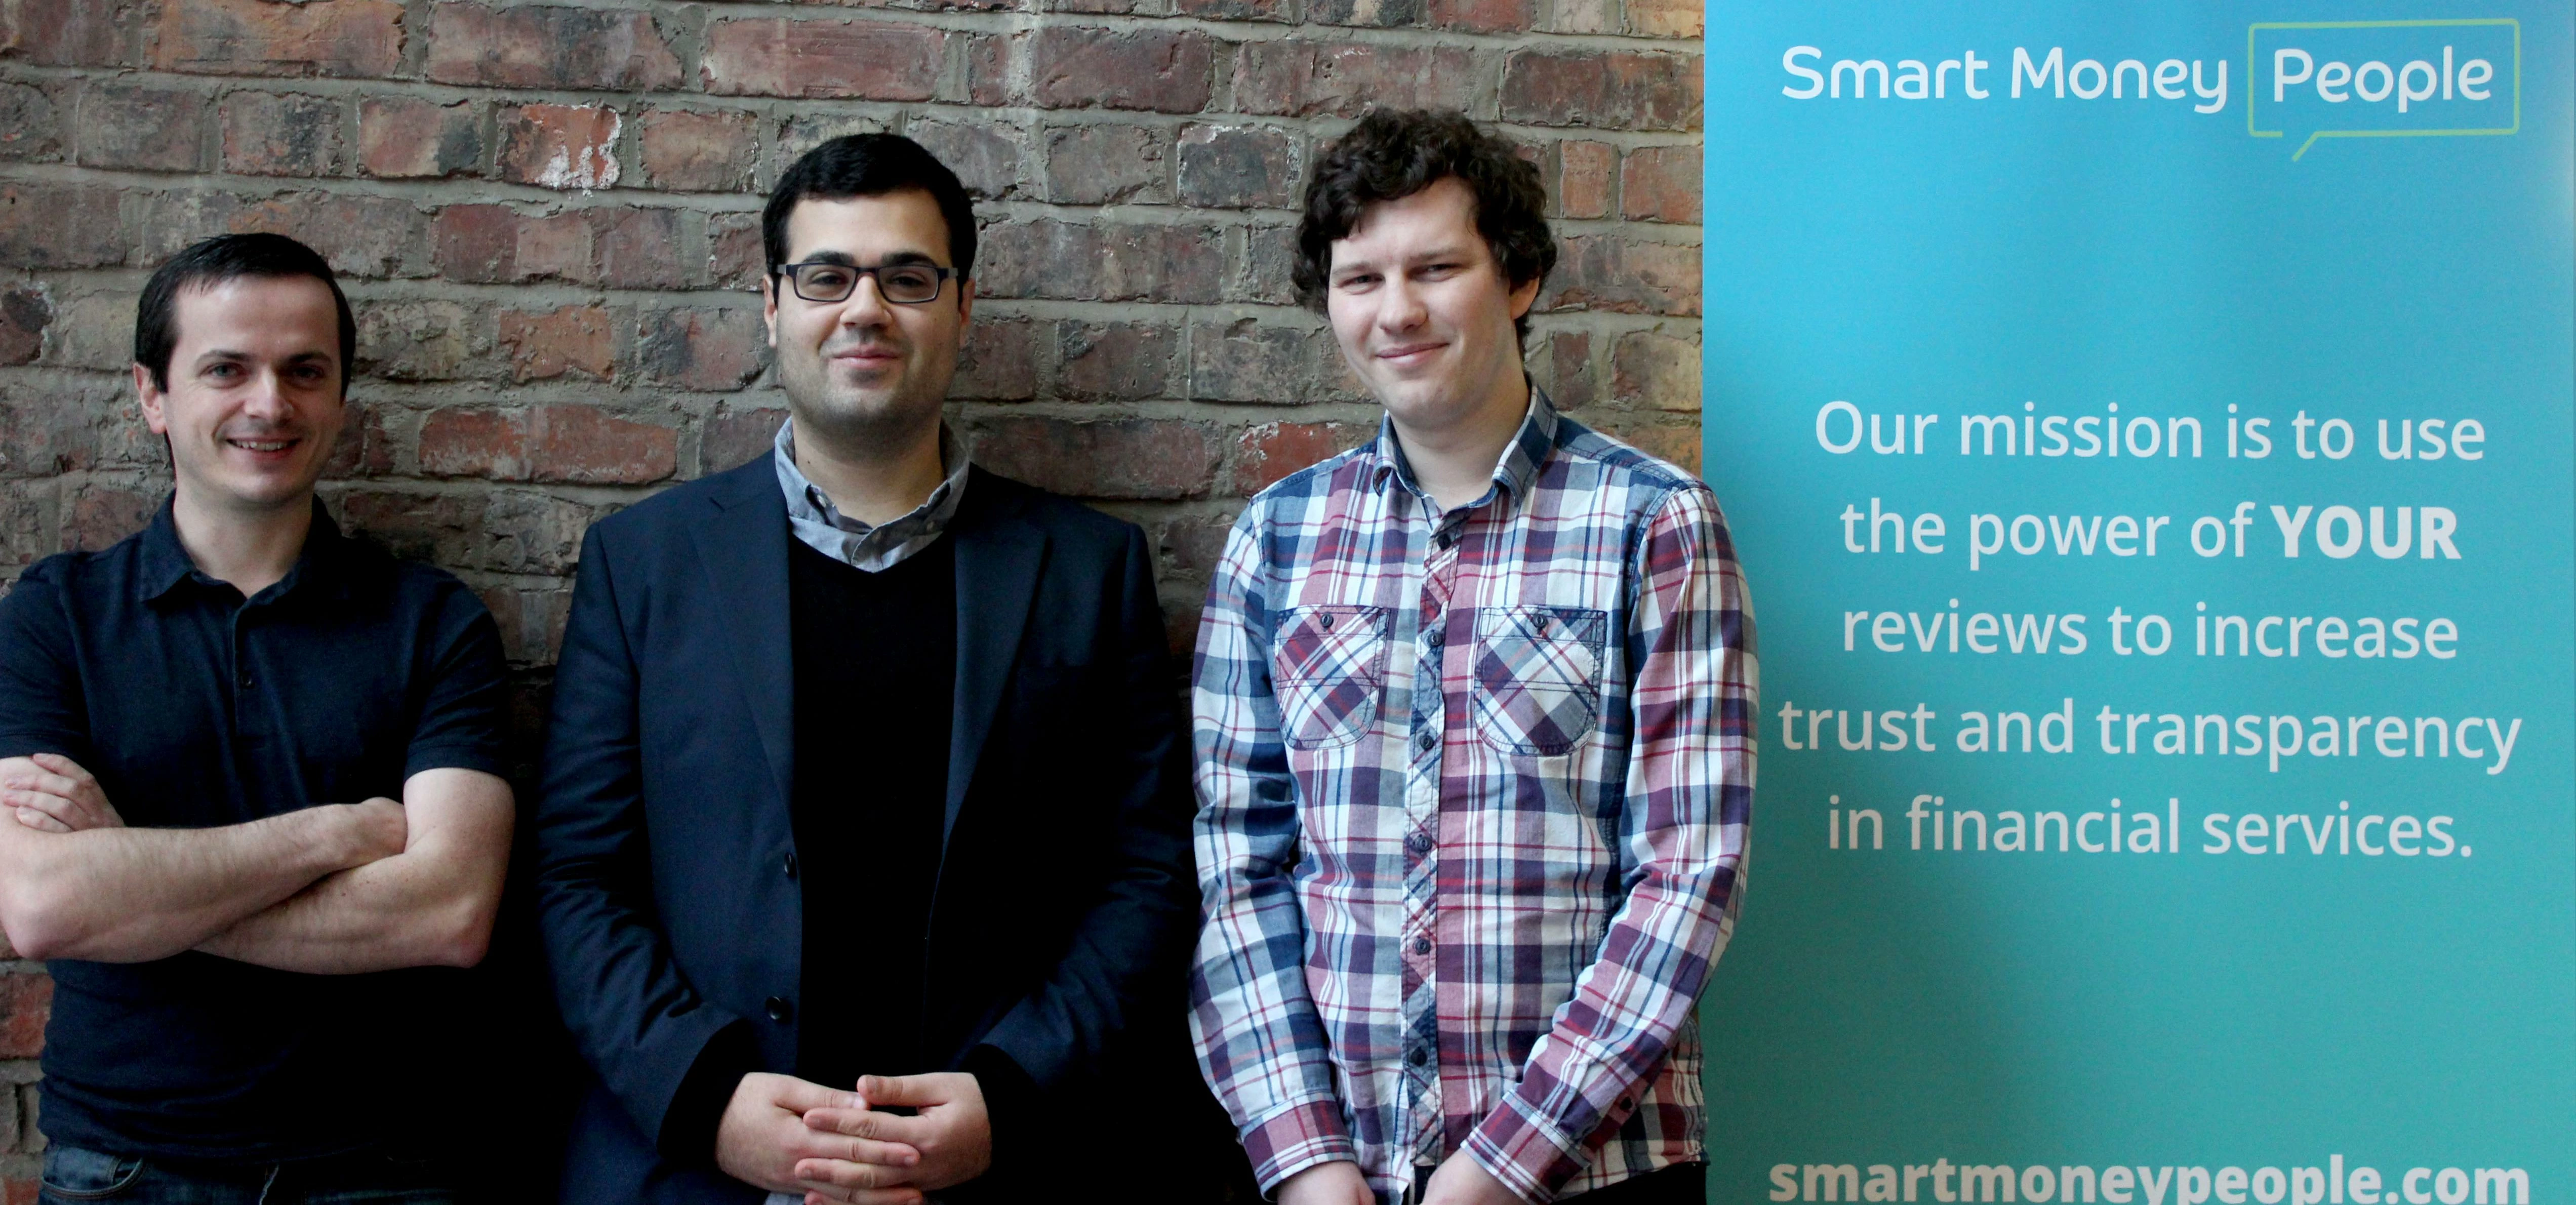 Some of the Smart Money People team - Jeff Lyall, Mike Fotis and Richard Turnbull